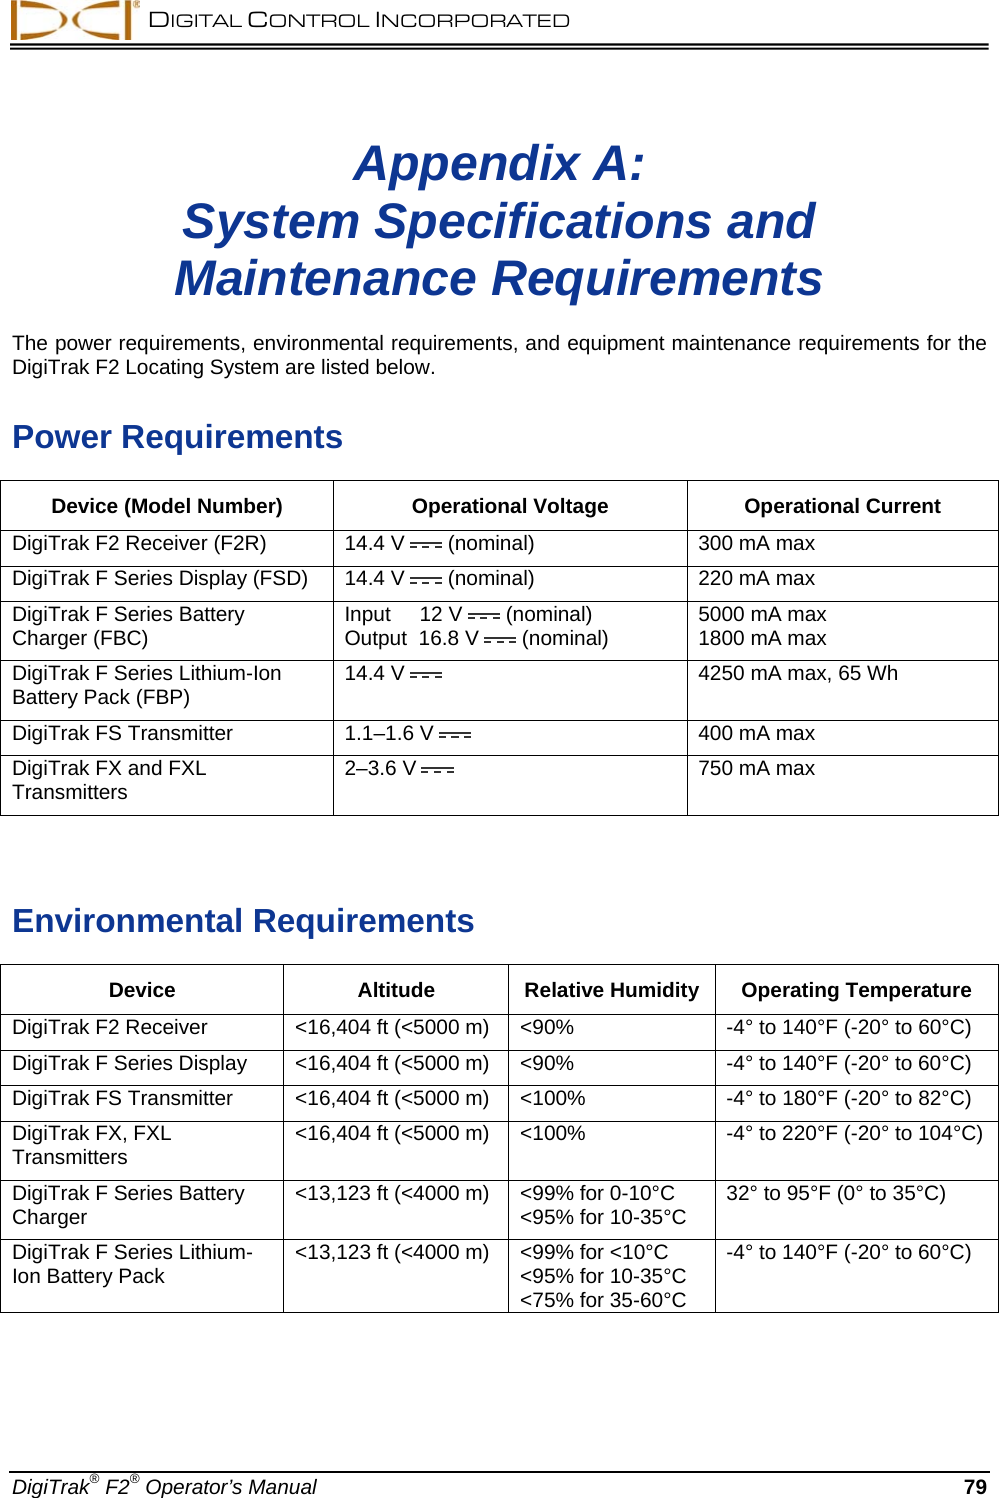  DIGITAL CONTROL INCORPORATED  DigiTrak® F2® Operator’s Manual 79 Appendix A: System Specifications and Maintenance Requirements  The power requirements, environmental requirements, and equipment maintenance requirements for the DigiTrak F2 Locating System are listed below. Power Requirements Device (Model Number)  Operational Voltage  Operational Current DigiTrak F2 Receiver (F2R) 14.4 V  (nominal) 300 mA max DigiTrak F Series Display (FSD) 14.4 V  (nominal) 220 mA max DigiTrak F Series Battery Charger (FBC) Input     12 V  (nominal) Output  16.8 V  (nominal) 5000 mA max 1800 mA max  DigiTrak F Series Lithium-Ion Battery Pack (FBP) 14.4 V  4250 mA max, 65 Wh  DigiTrak FS Transmitter 1.1–1.6 V  400 mA max DigiTrak FX and FXL Transmitters  2–3.6 V  750 mA max   Environmental Requirements Device Altitude Relative Humidity Operating Temperature DigiTrak F2 Receiver &lt;16,404 ft (&lt;5000 m) &lt;90% -4° to 140°F (-20° to 60°C) DigiTrak F Series Display &lt;16,404 ft (&lt;5000 m) &lt;90% -4° to 140°F (-20° to 60°C) DigiTrak FS Transmitter &lt;16,404 ft (&lt;5000 m) &lt;100% -4° to 180°F (-20° to 82°C) DigiTrak FX, FXL Transmitters &lt;16,404 ft (&lt;5000 m) &lt;100% -4° to 220°F (-20° to 104°C) DigiTrak F Series Battery Charger &lt;13,123 ft (&lt;4000 m) &lt;99% for 0-10°C &lt;95% for 10-35°C 32° to 95°F (0° to 35°C) DigiTrak F Series Lithium-Ion Battery Pack &lt;13,123 ft (&lt;4000 m) &lt;99% for &lt;10°C &lt;95% for 10-35°C &lt;75% for 35-60°C -4° to 140°F (-20° to 60°C)  